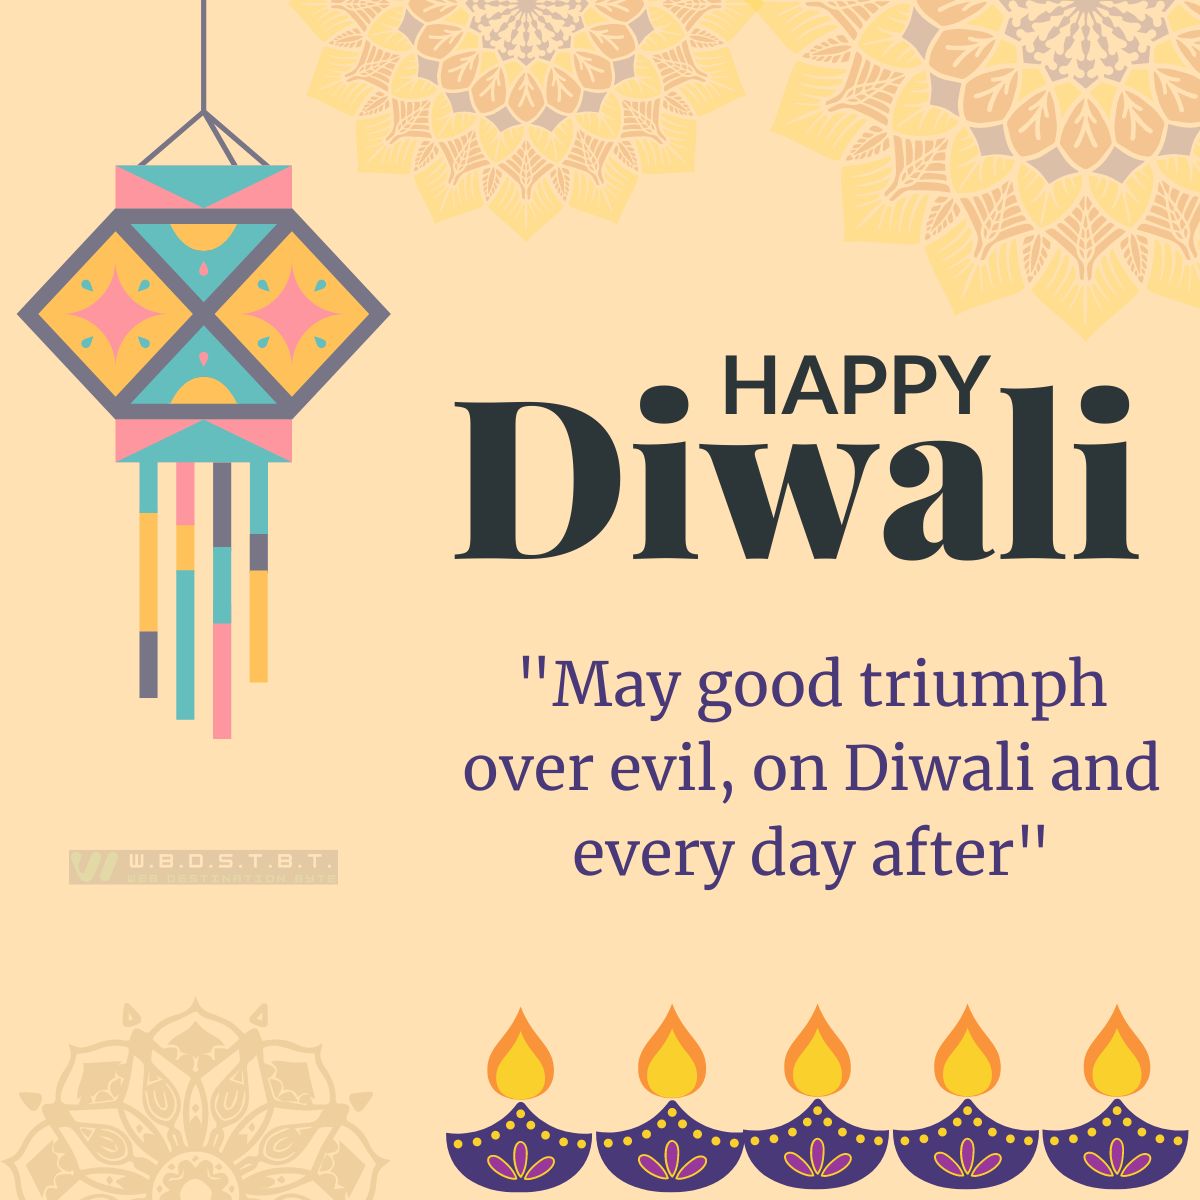 "May good triumph over evil, on Diwali and every day after"